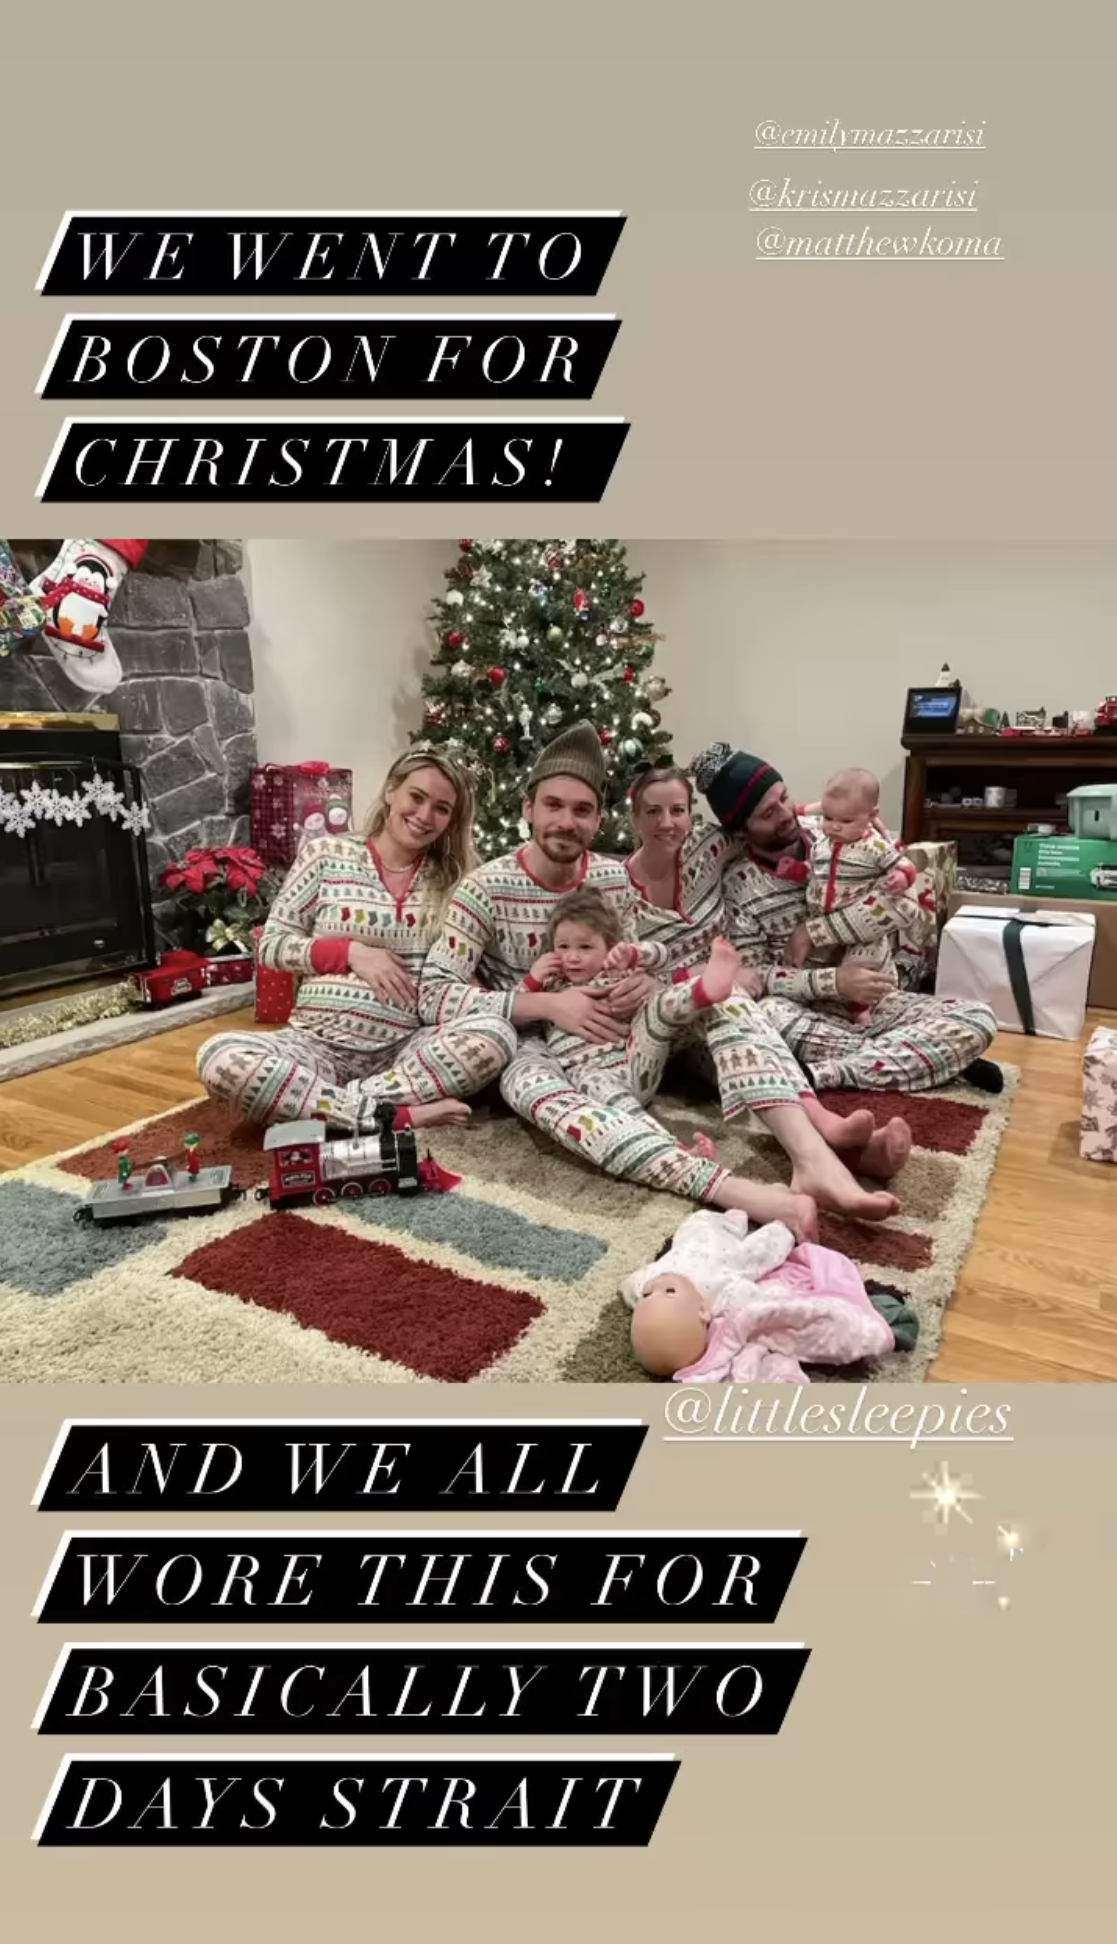 Hilary Duff & Her Family On Christmas Day 